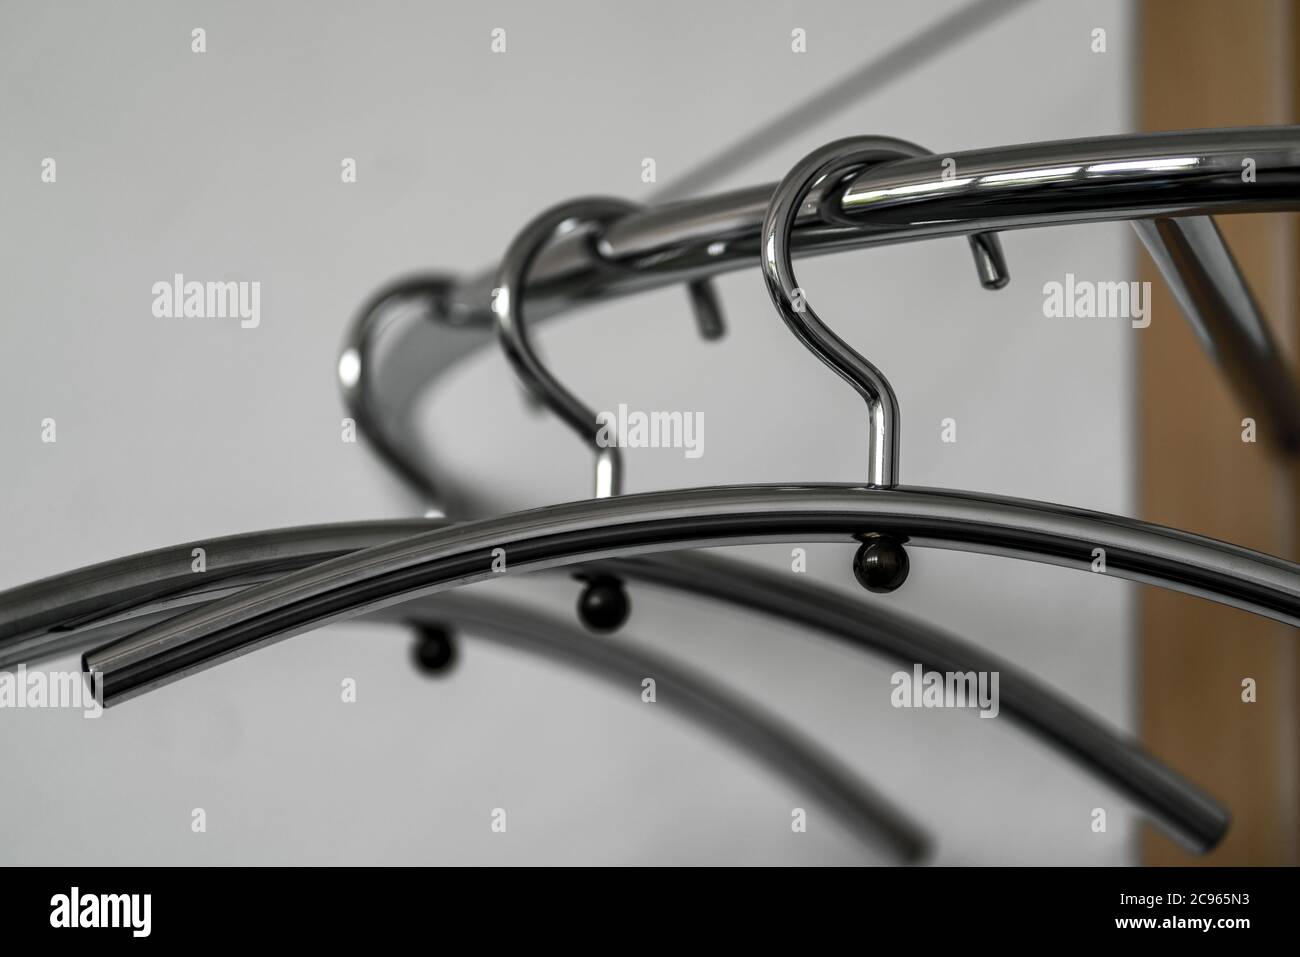 Three chrome plated hangers hanging empty from a wooden coat rack Stock Photo